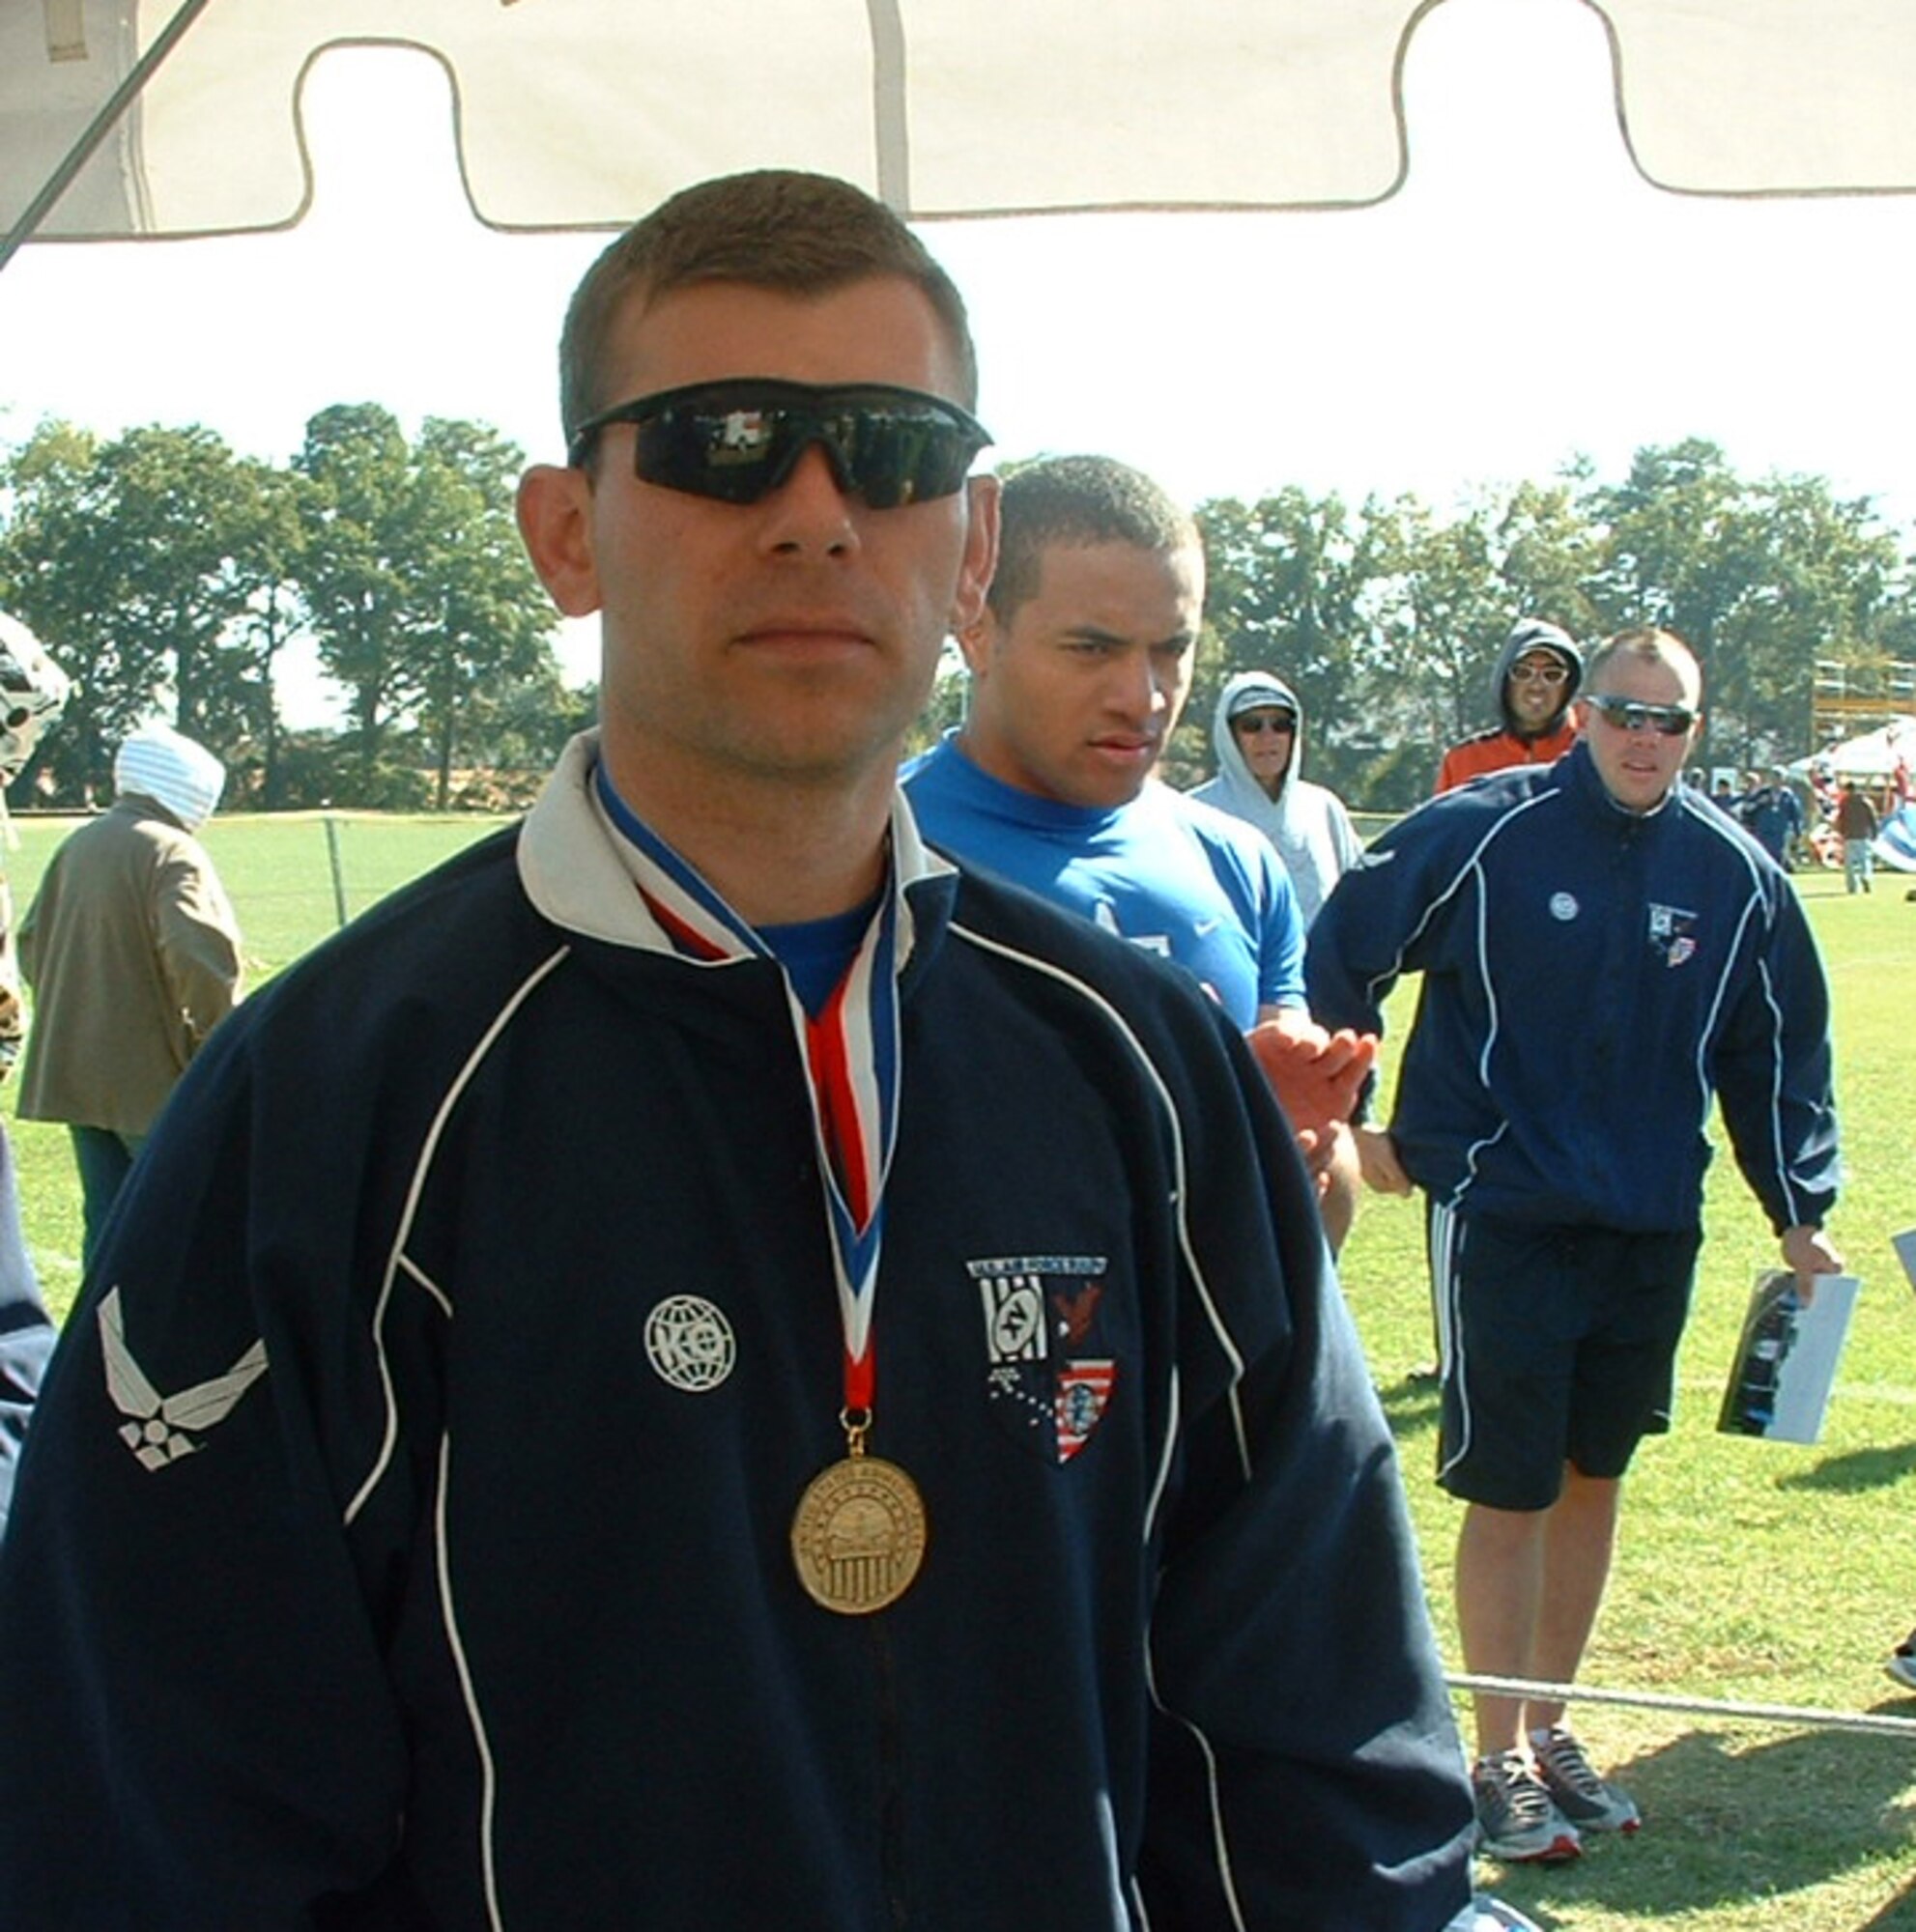 RAF MILDENHALL, England -- Tech. Sgt. Jammey Tipper-Booth, from the 100th Civil Engineer Squadron, proudly shows off his winning medal after competing in the Armed Forces Rugby Championships in Fort Benning, Ga., Nov. 1 to 7, 2010. The Air Force team won their seventh straight championship, defeating the Army, Navy, Marine Corps and Coast Guard along the way. (U.S. Air Force/ Capt. Reza Grigorian)